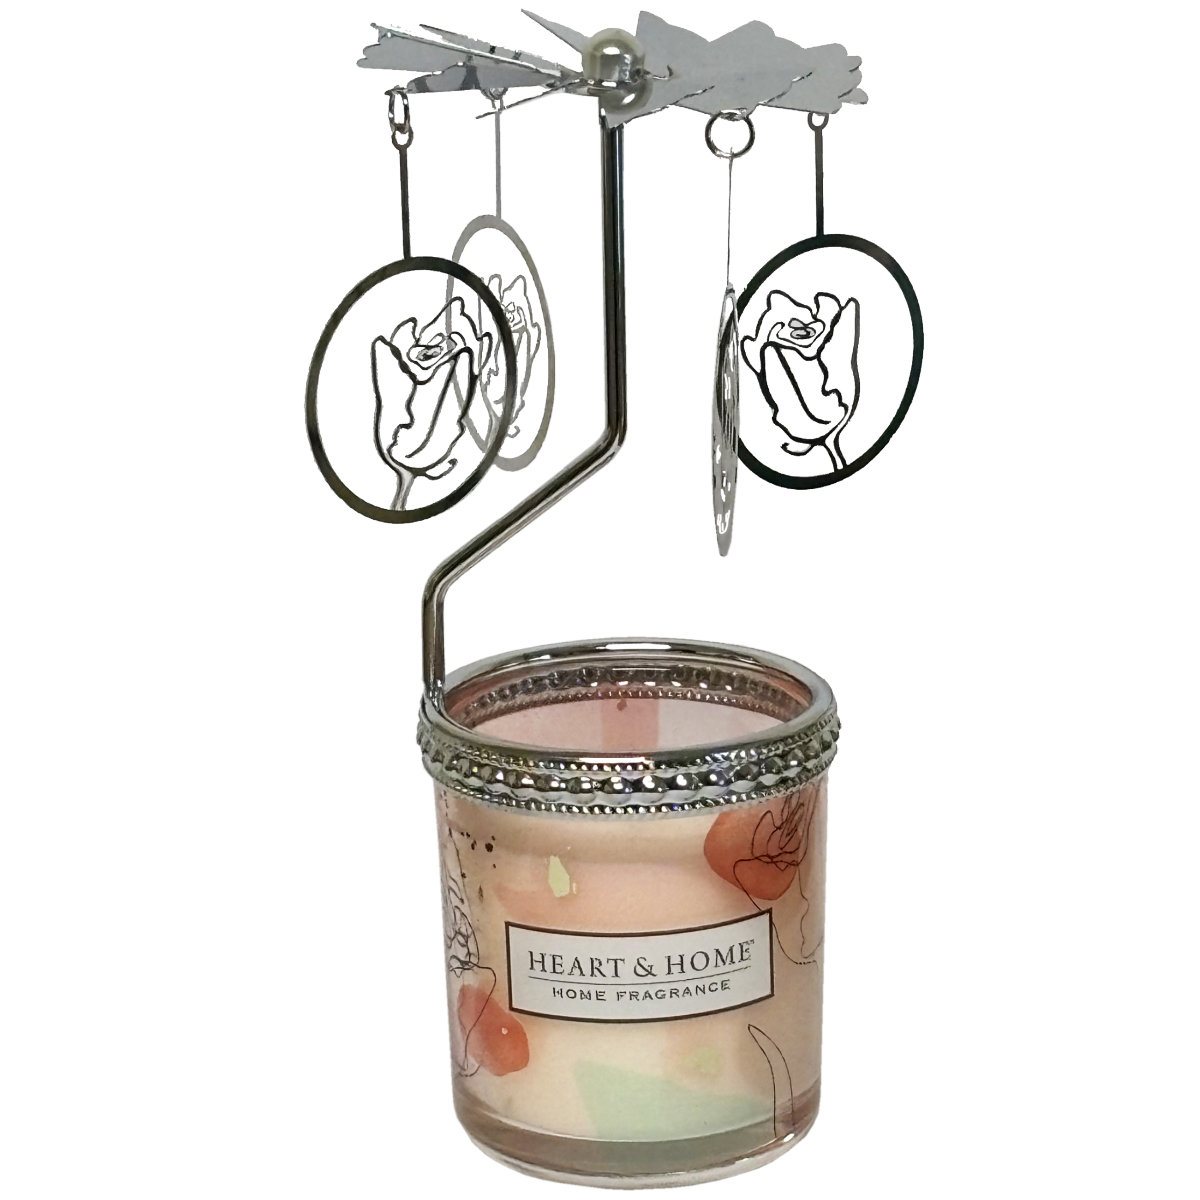 Heart and Home With love small candle gift box with Carrousel